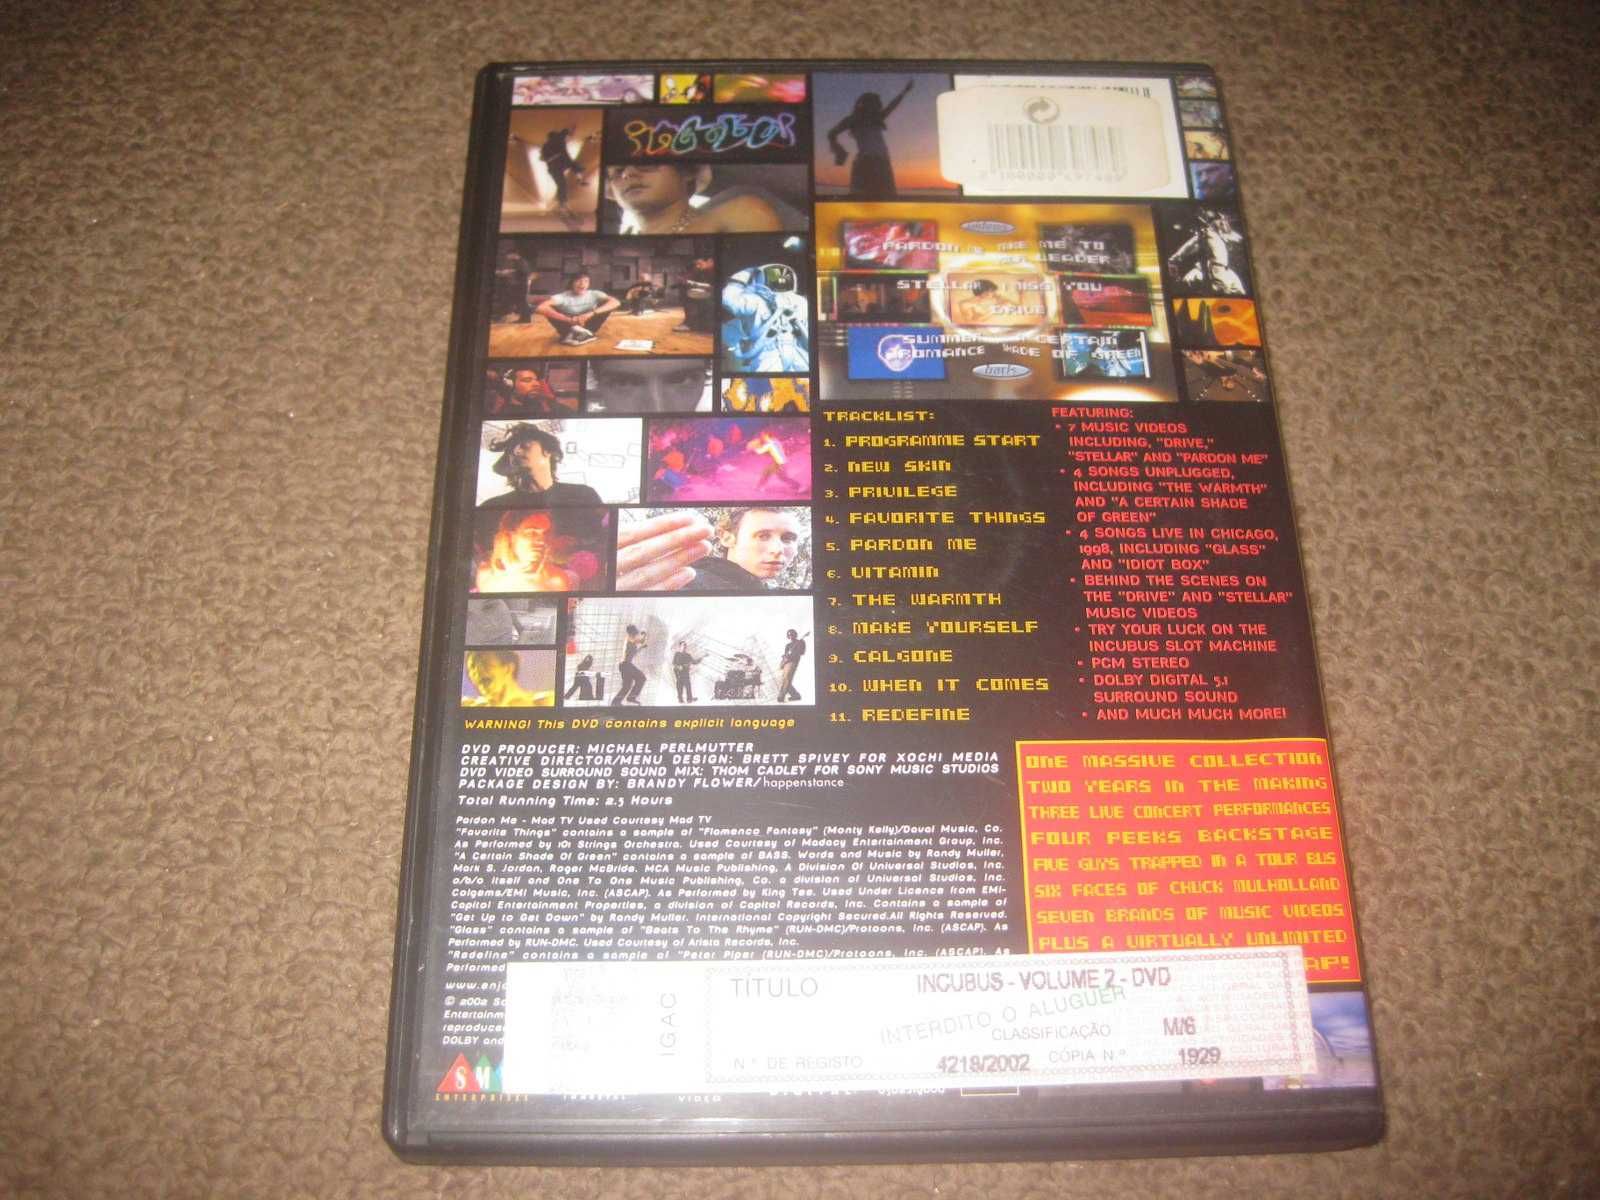 DVD Musical dos Incubus "Volume 2"